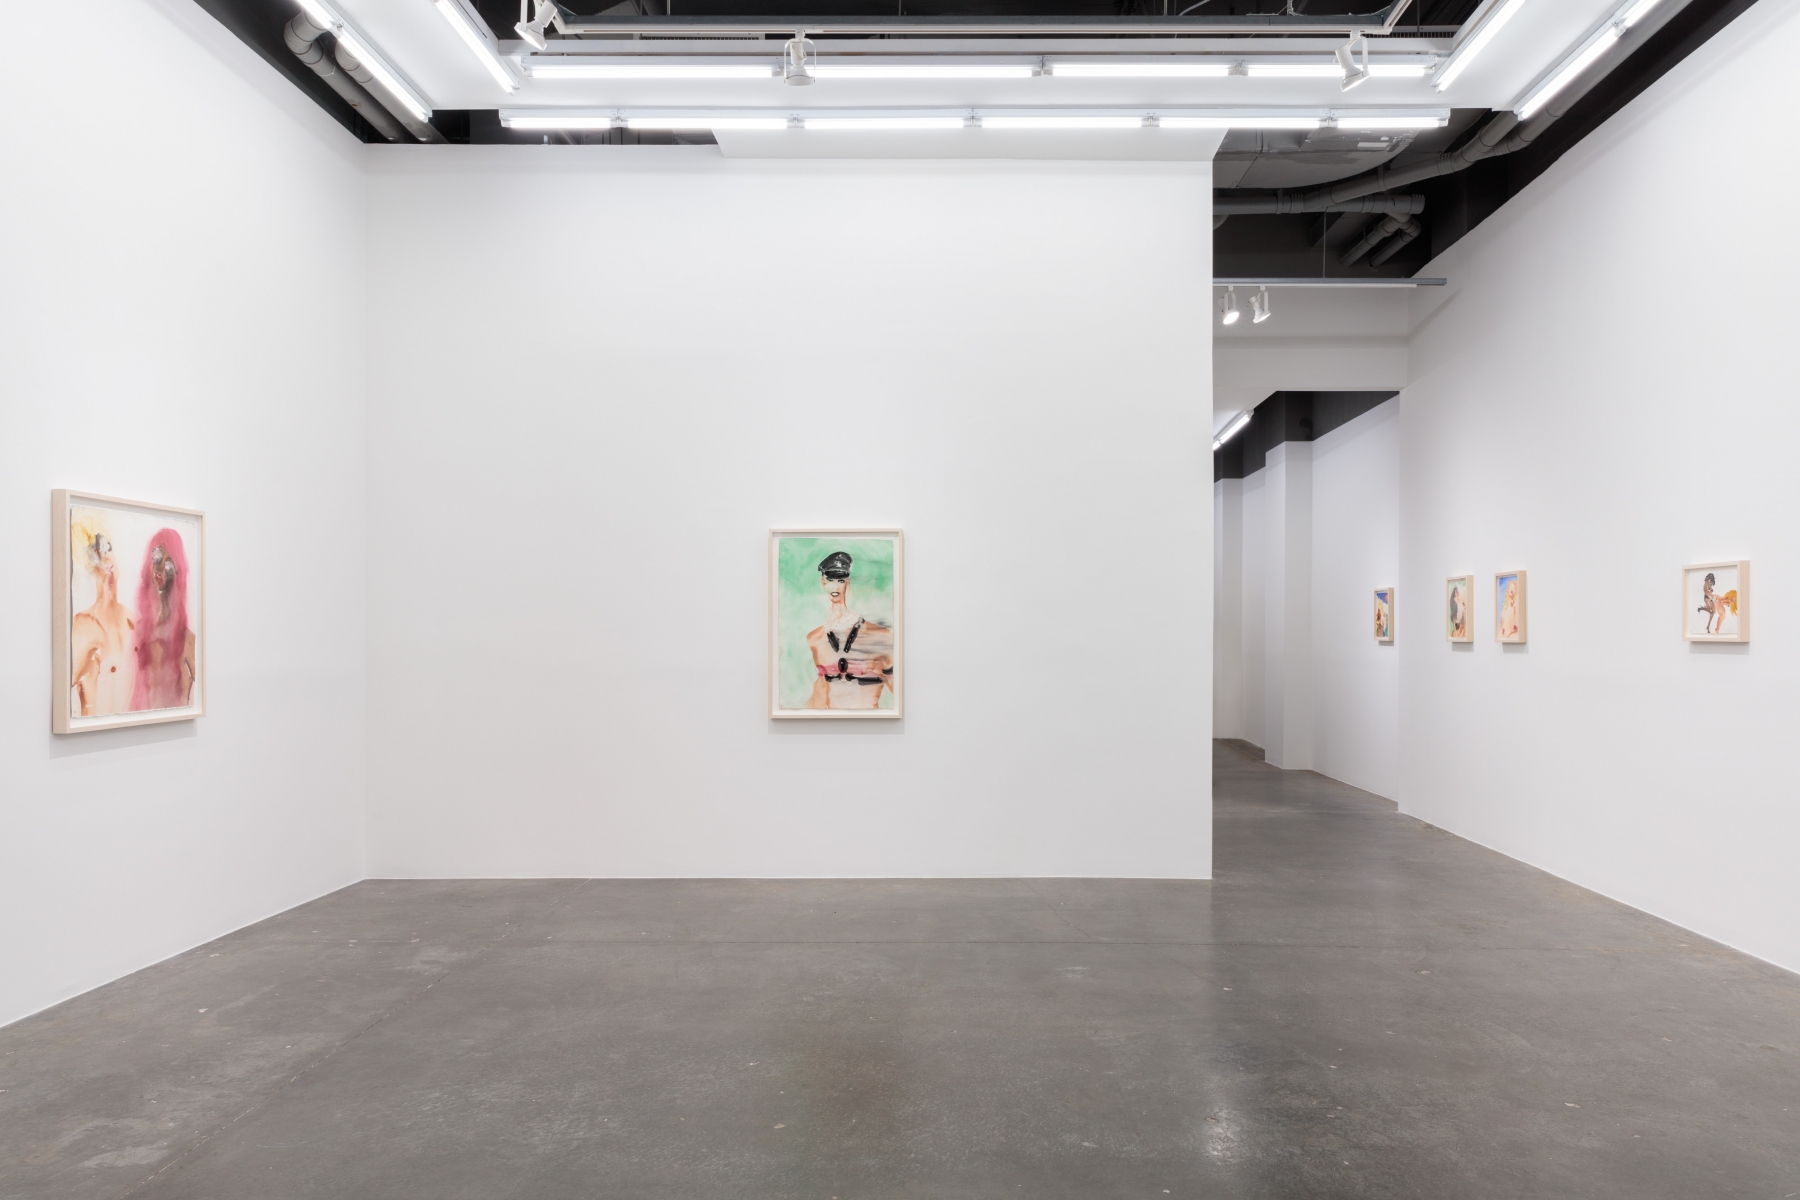 Installation View of Nadine Faraj &quot;Get Used to Us&quot;, February 28 - April 6, 2019,&nbsp;at Anna Zorina Gallery, New York City.